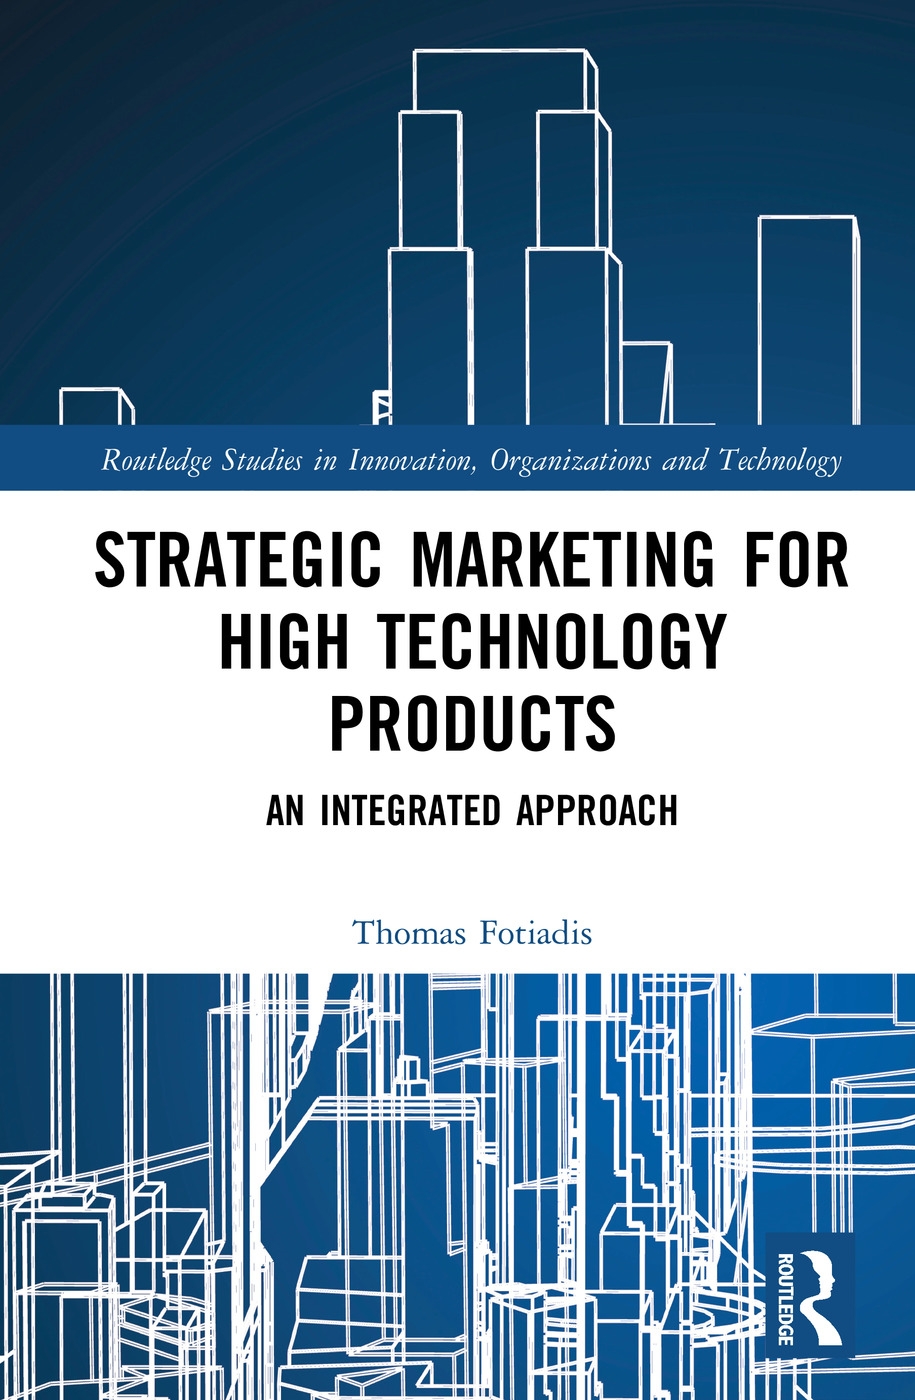 Strategic Marketing for High Technology Products: An Integrated Approach